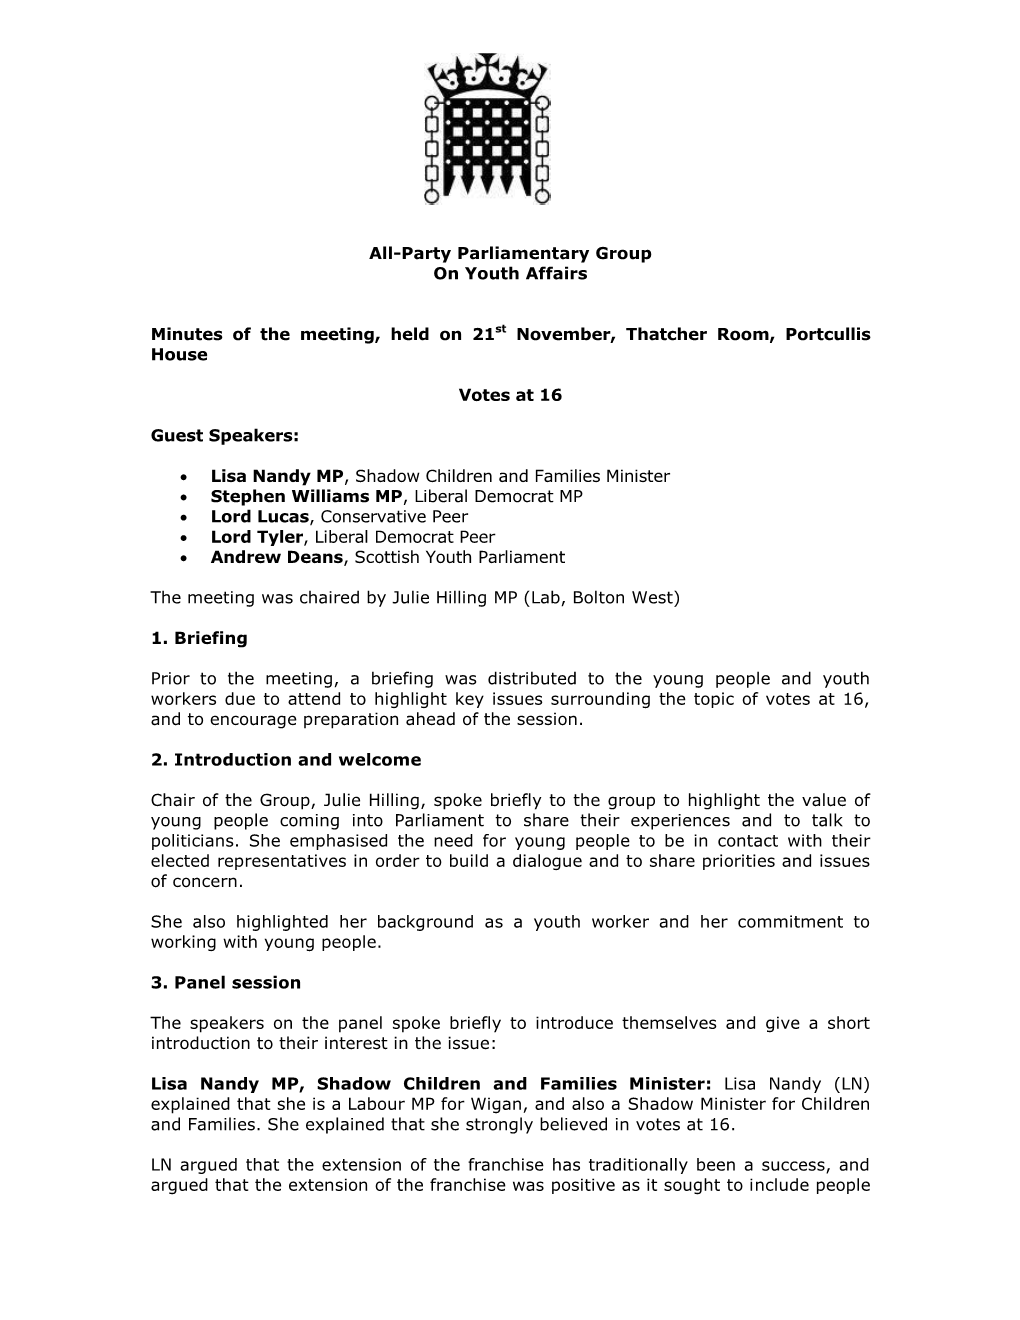 All-Party Parliamentary Group on Youth Affairs Minutes of the Meeting, Held on 21St November, Thatcher Room, Portcullis House Vo